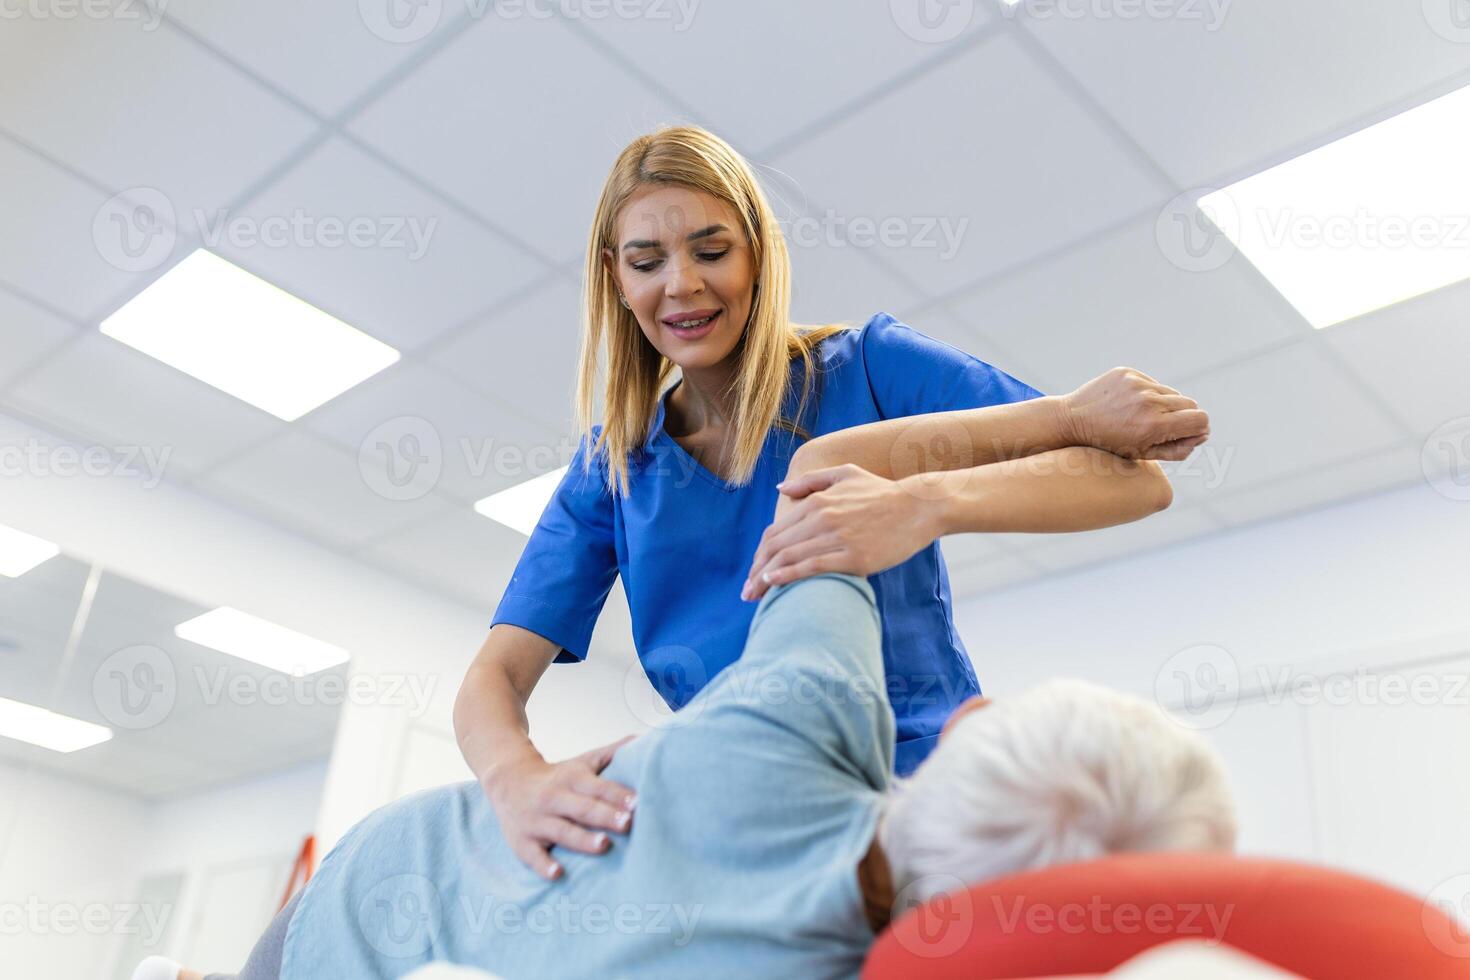 Senior woman having chiropractic back adjustment. Osteopathy, Alternative medicine, pain relief concept. Physiotherapy, injury rehabilitation photo